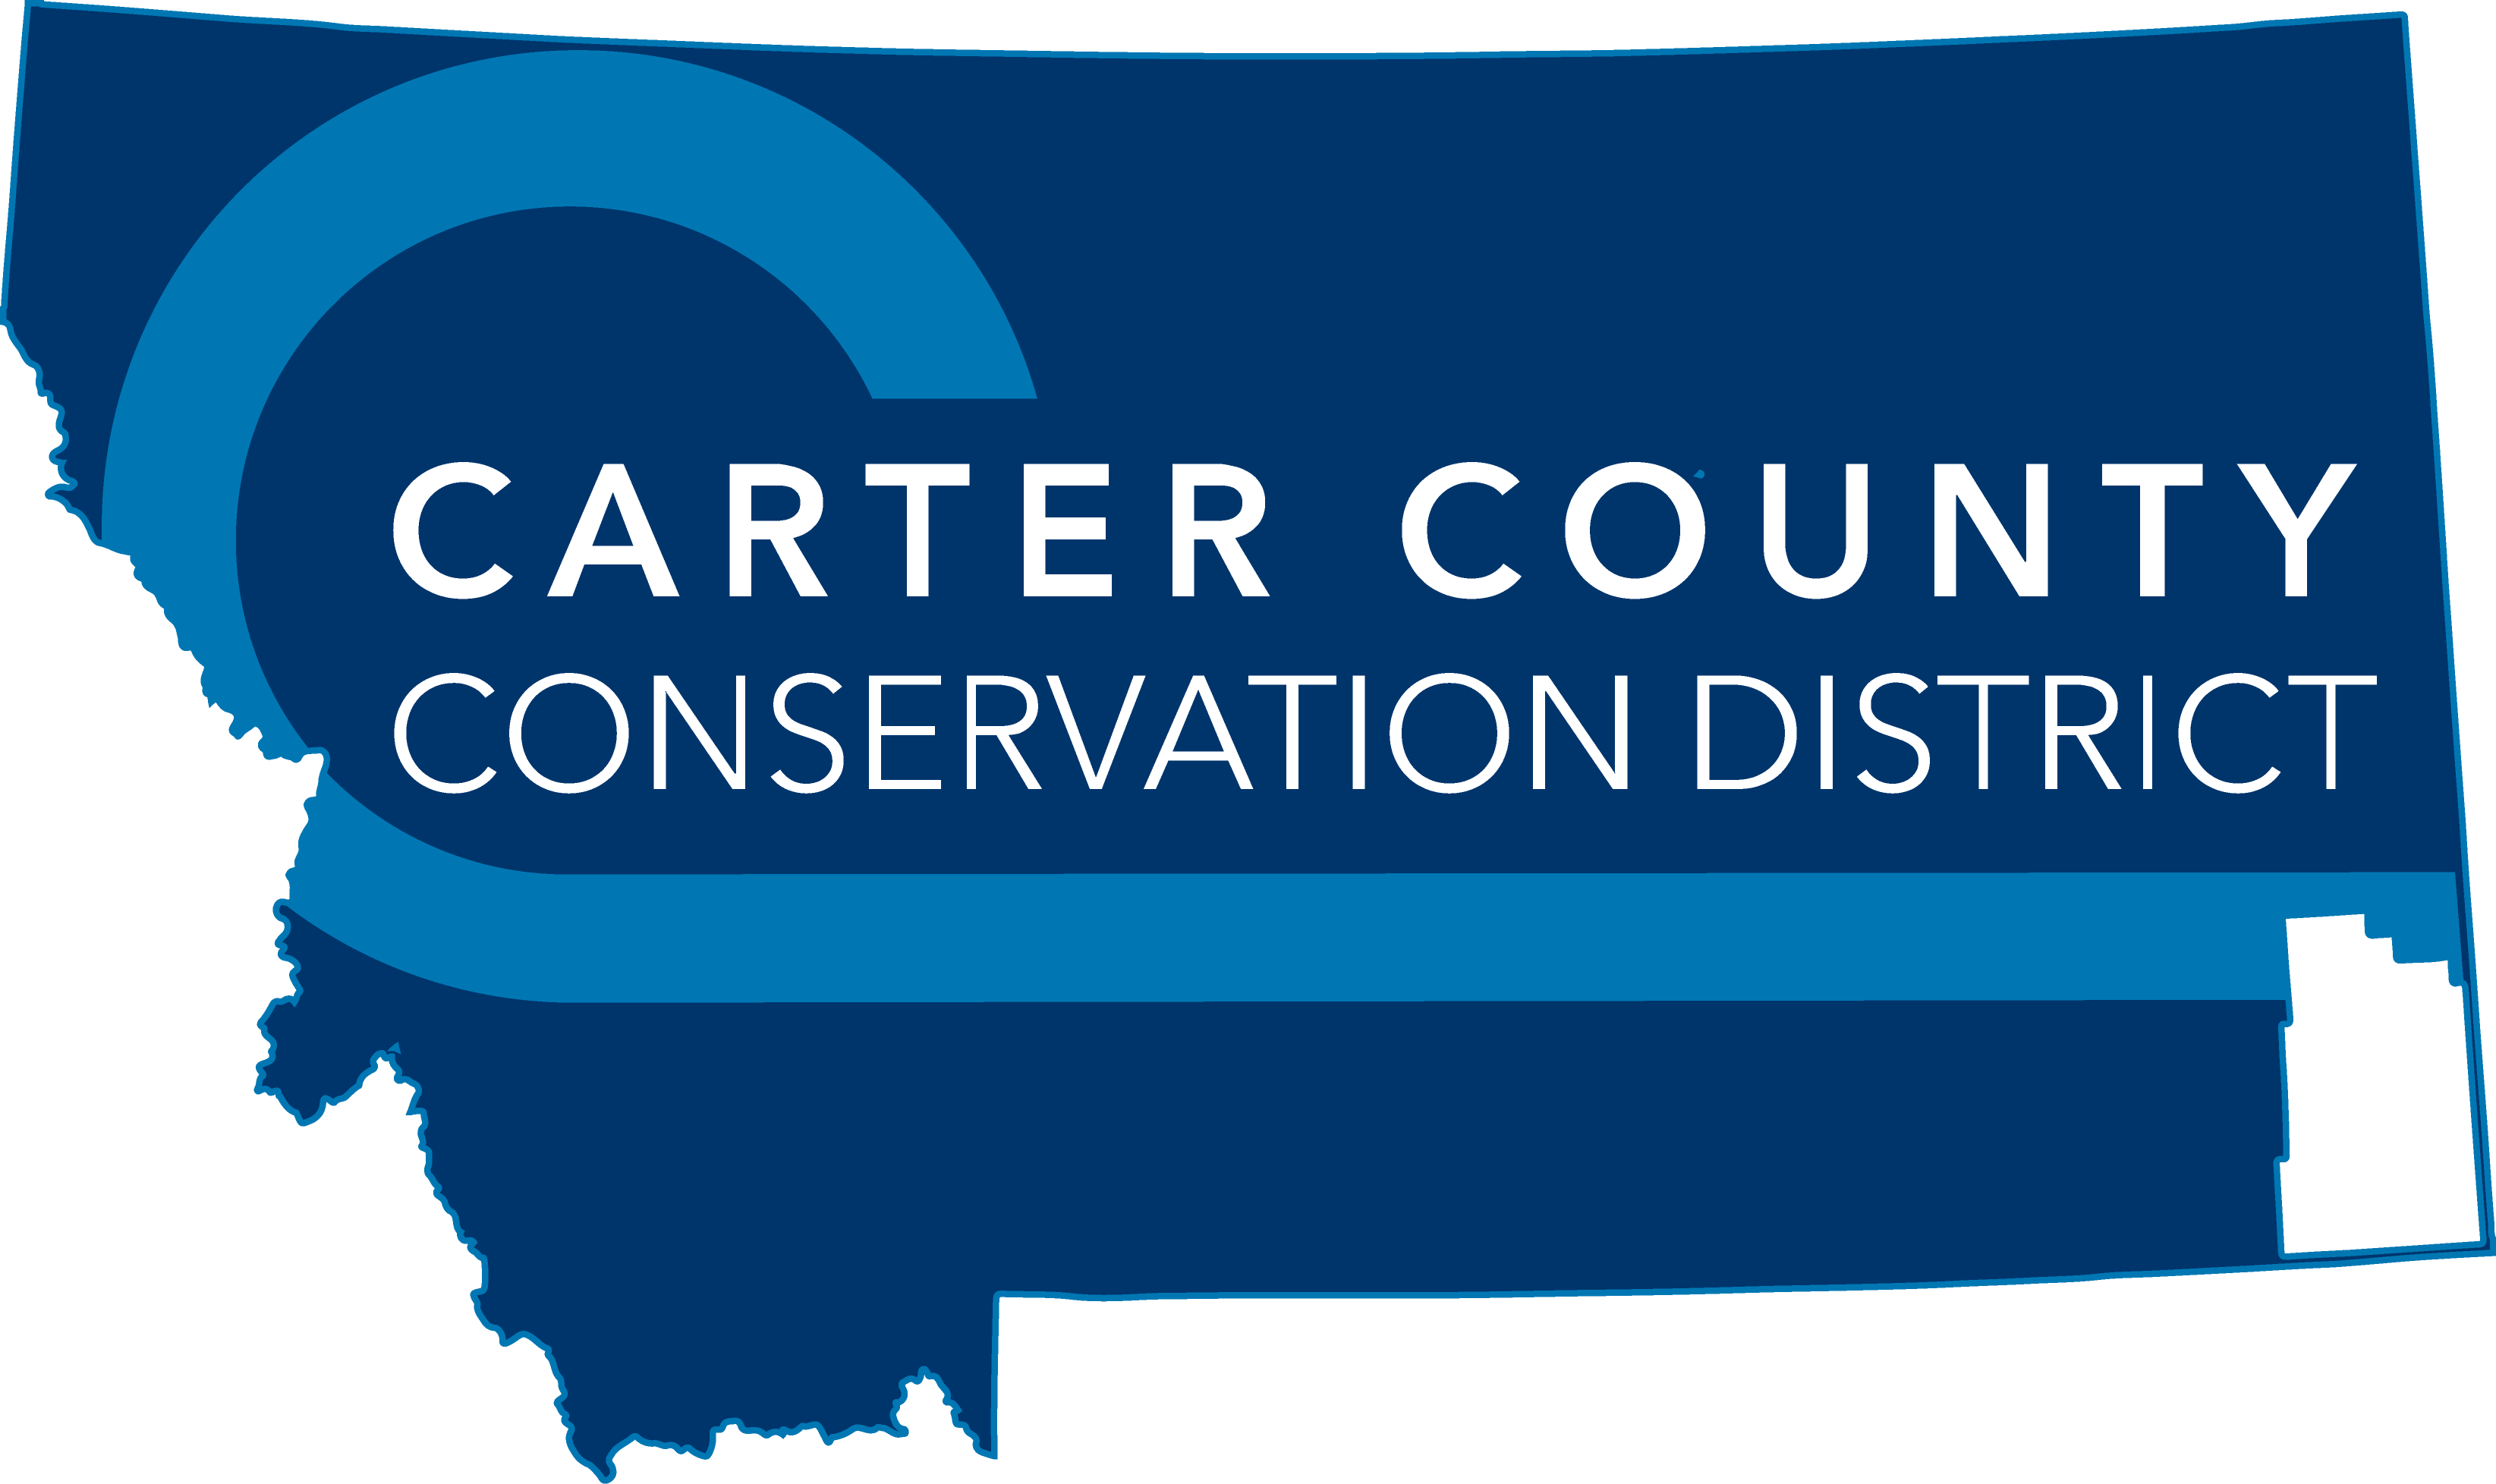 Carter County Conservation District